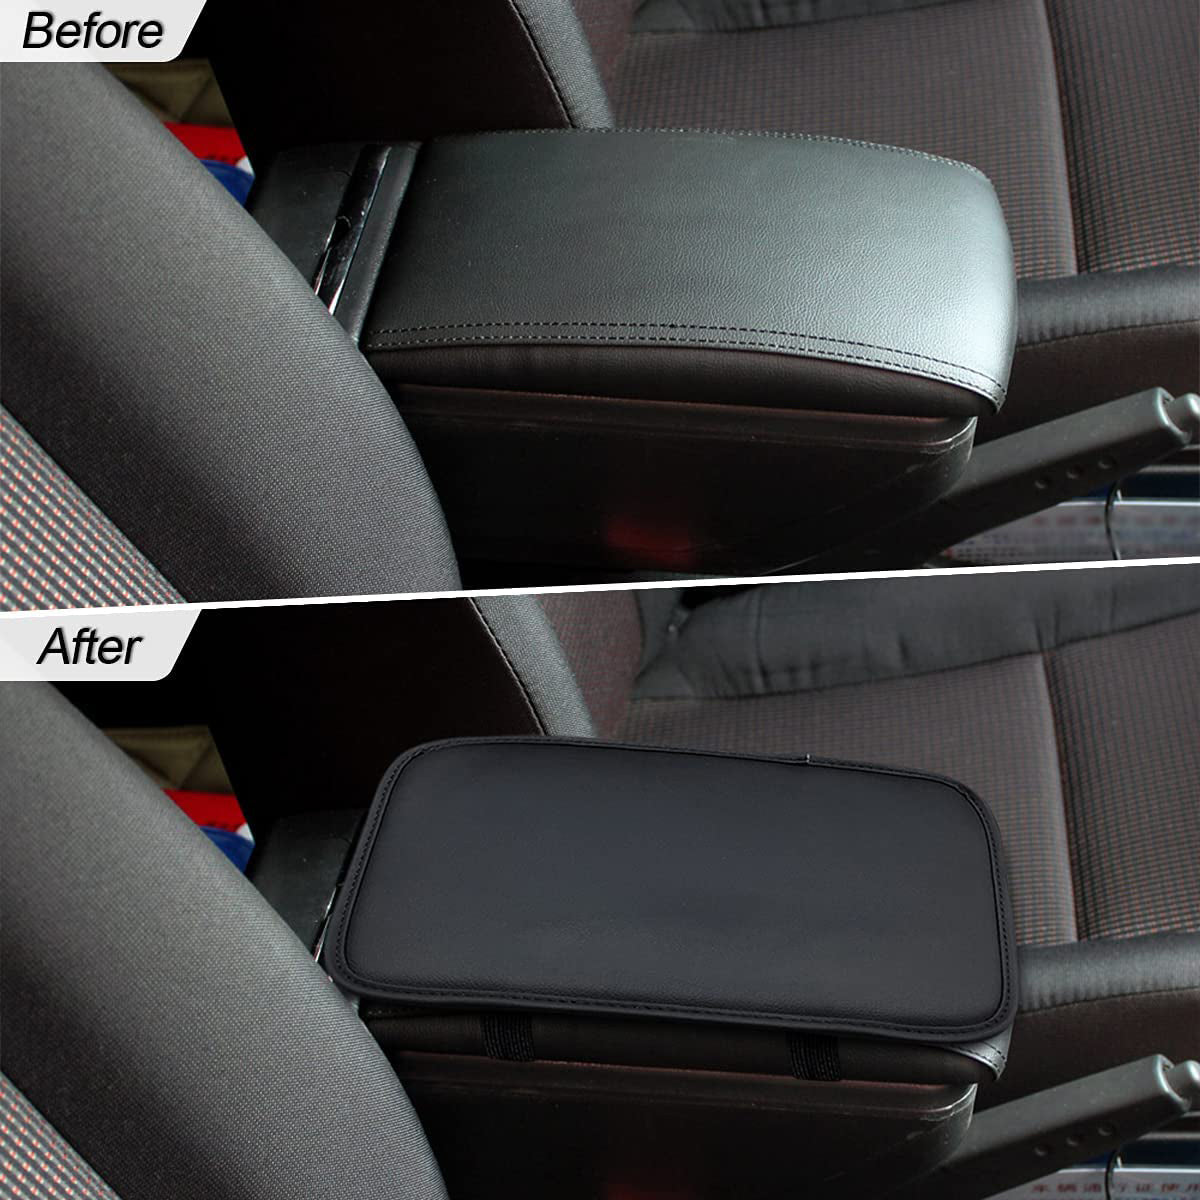 Leather Center Console Cushion Pad, Custom Fit For Your Cars, Waterproof Armrest Seat Box Cover Fit, Car Interior Protection Accessories, Car Accessories JG13991